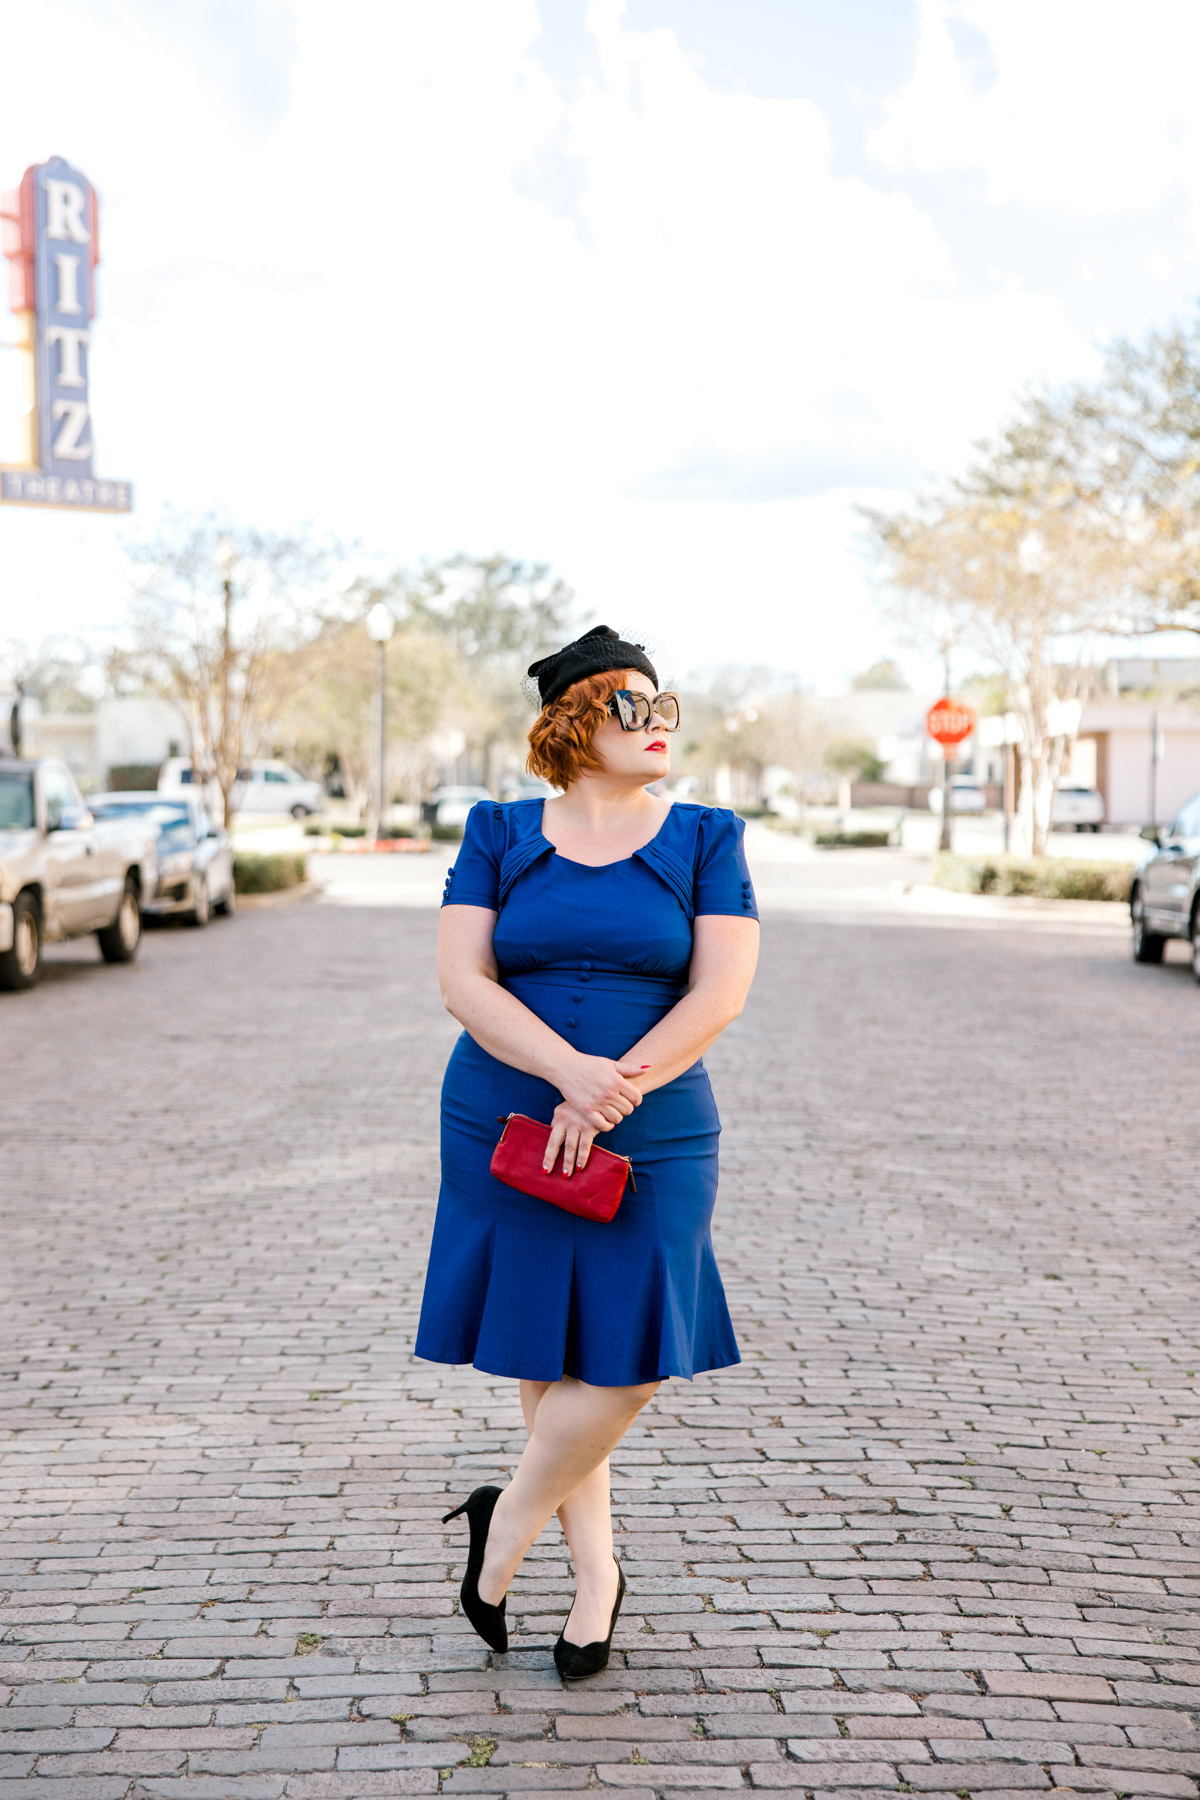 Old Hollywood glam 1950's photo shoot -- woman in vintage blue dress, pillbox hat, red purse, black pumps -- big sunglasses